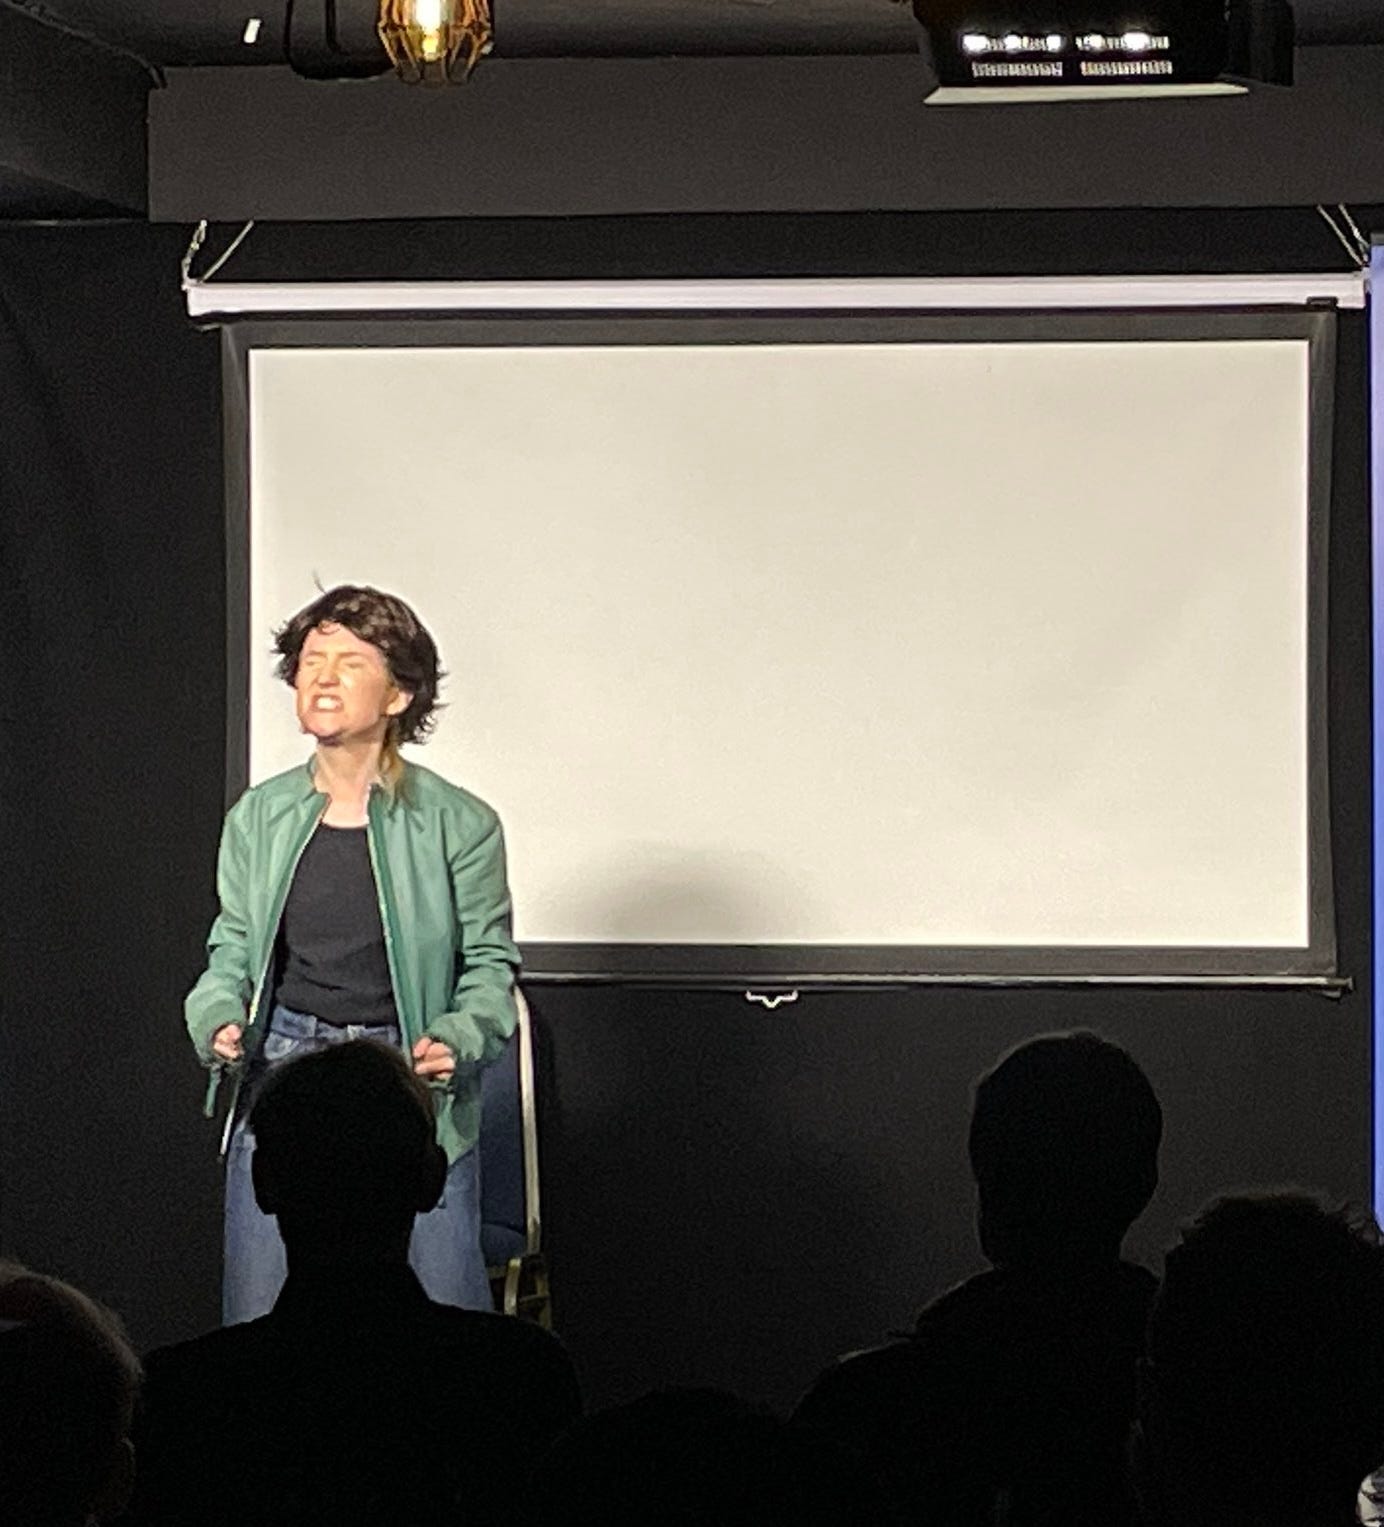 Comedian in a short brown wig and green jacket pulling a strained expression on stage in front of a projector sceen